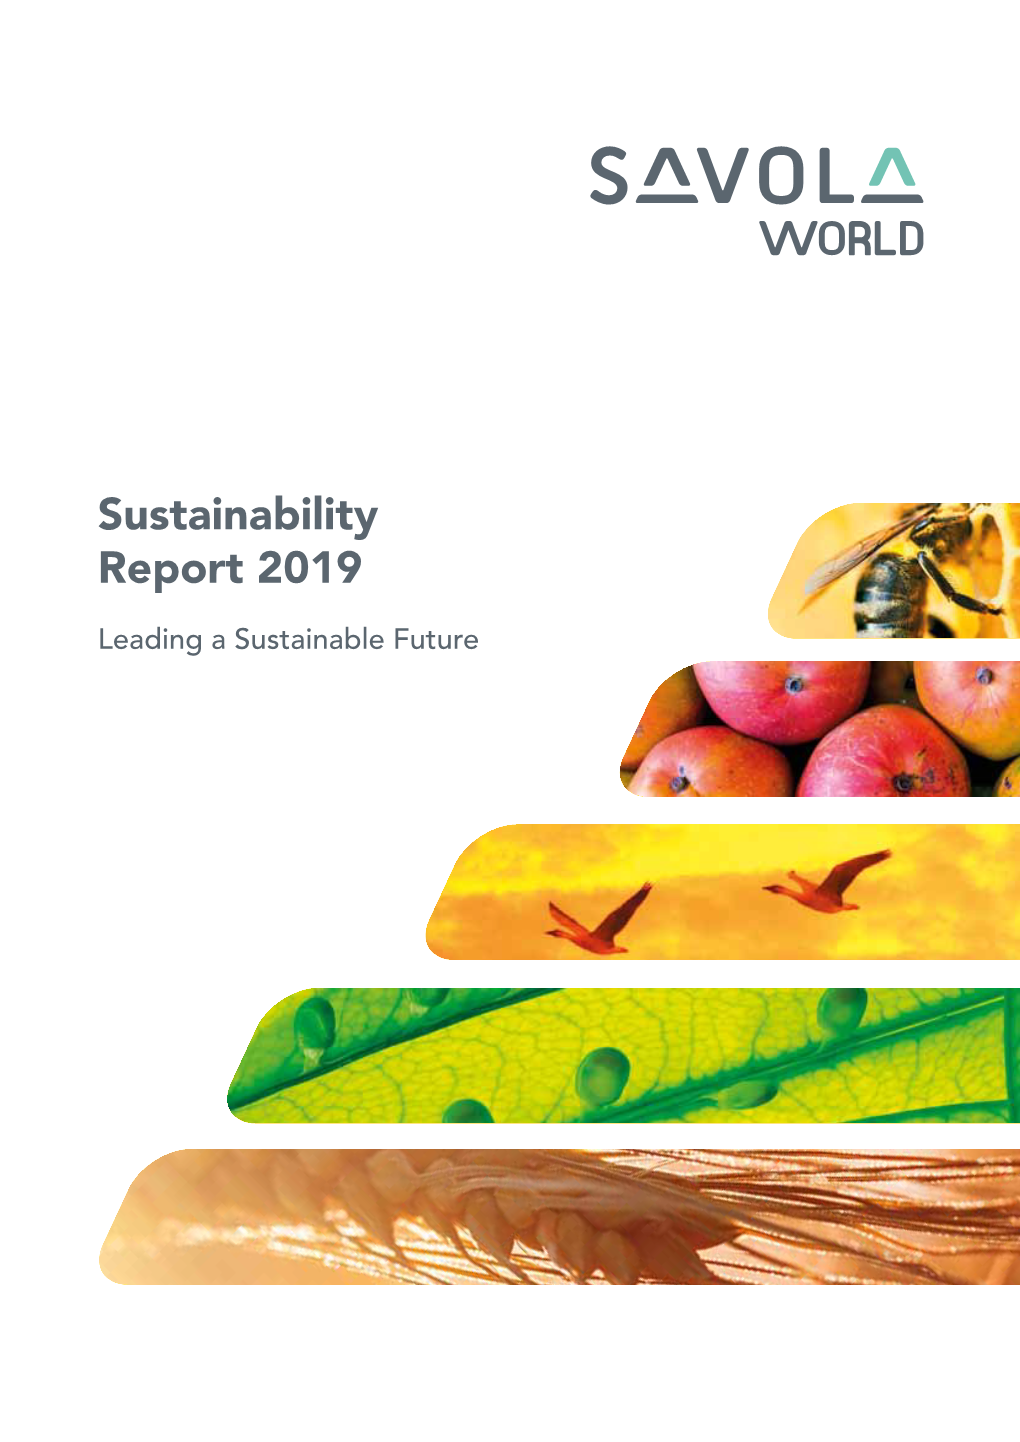 Sustainability Report 2019 Download